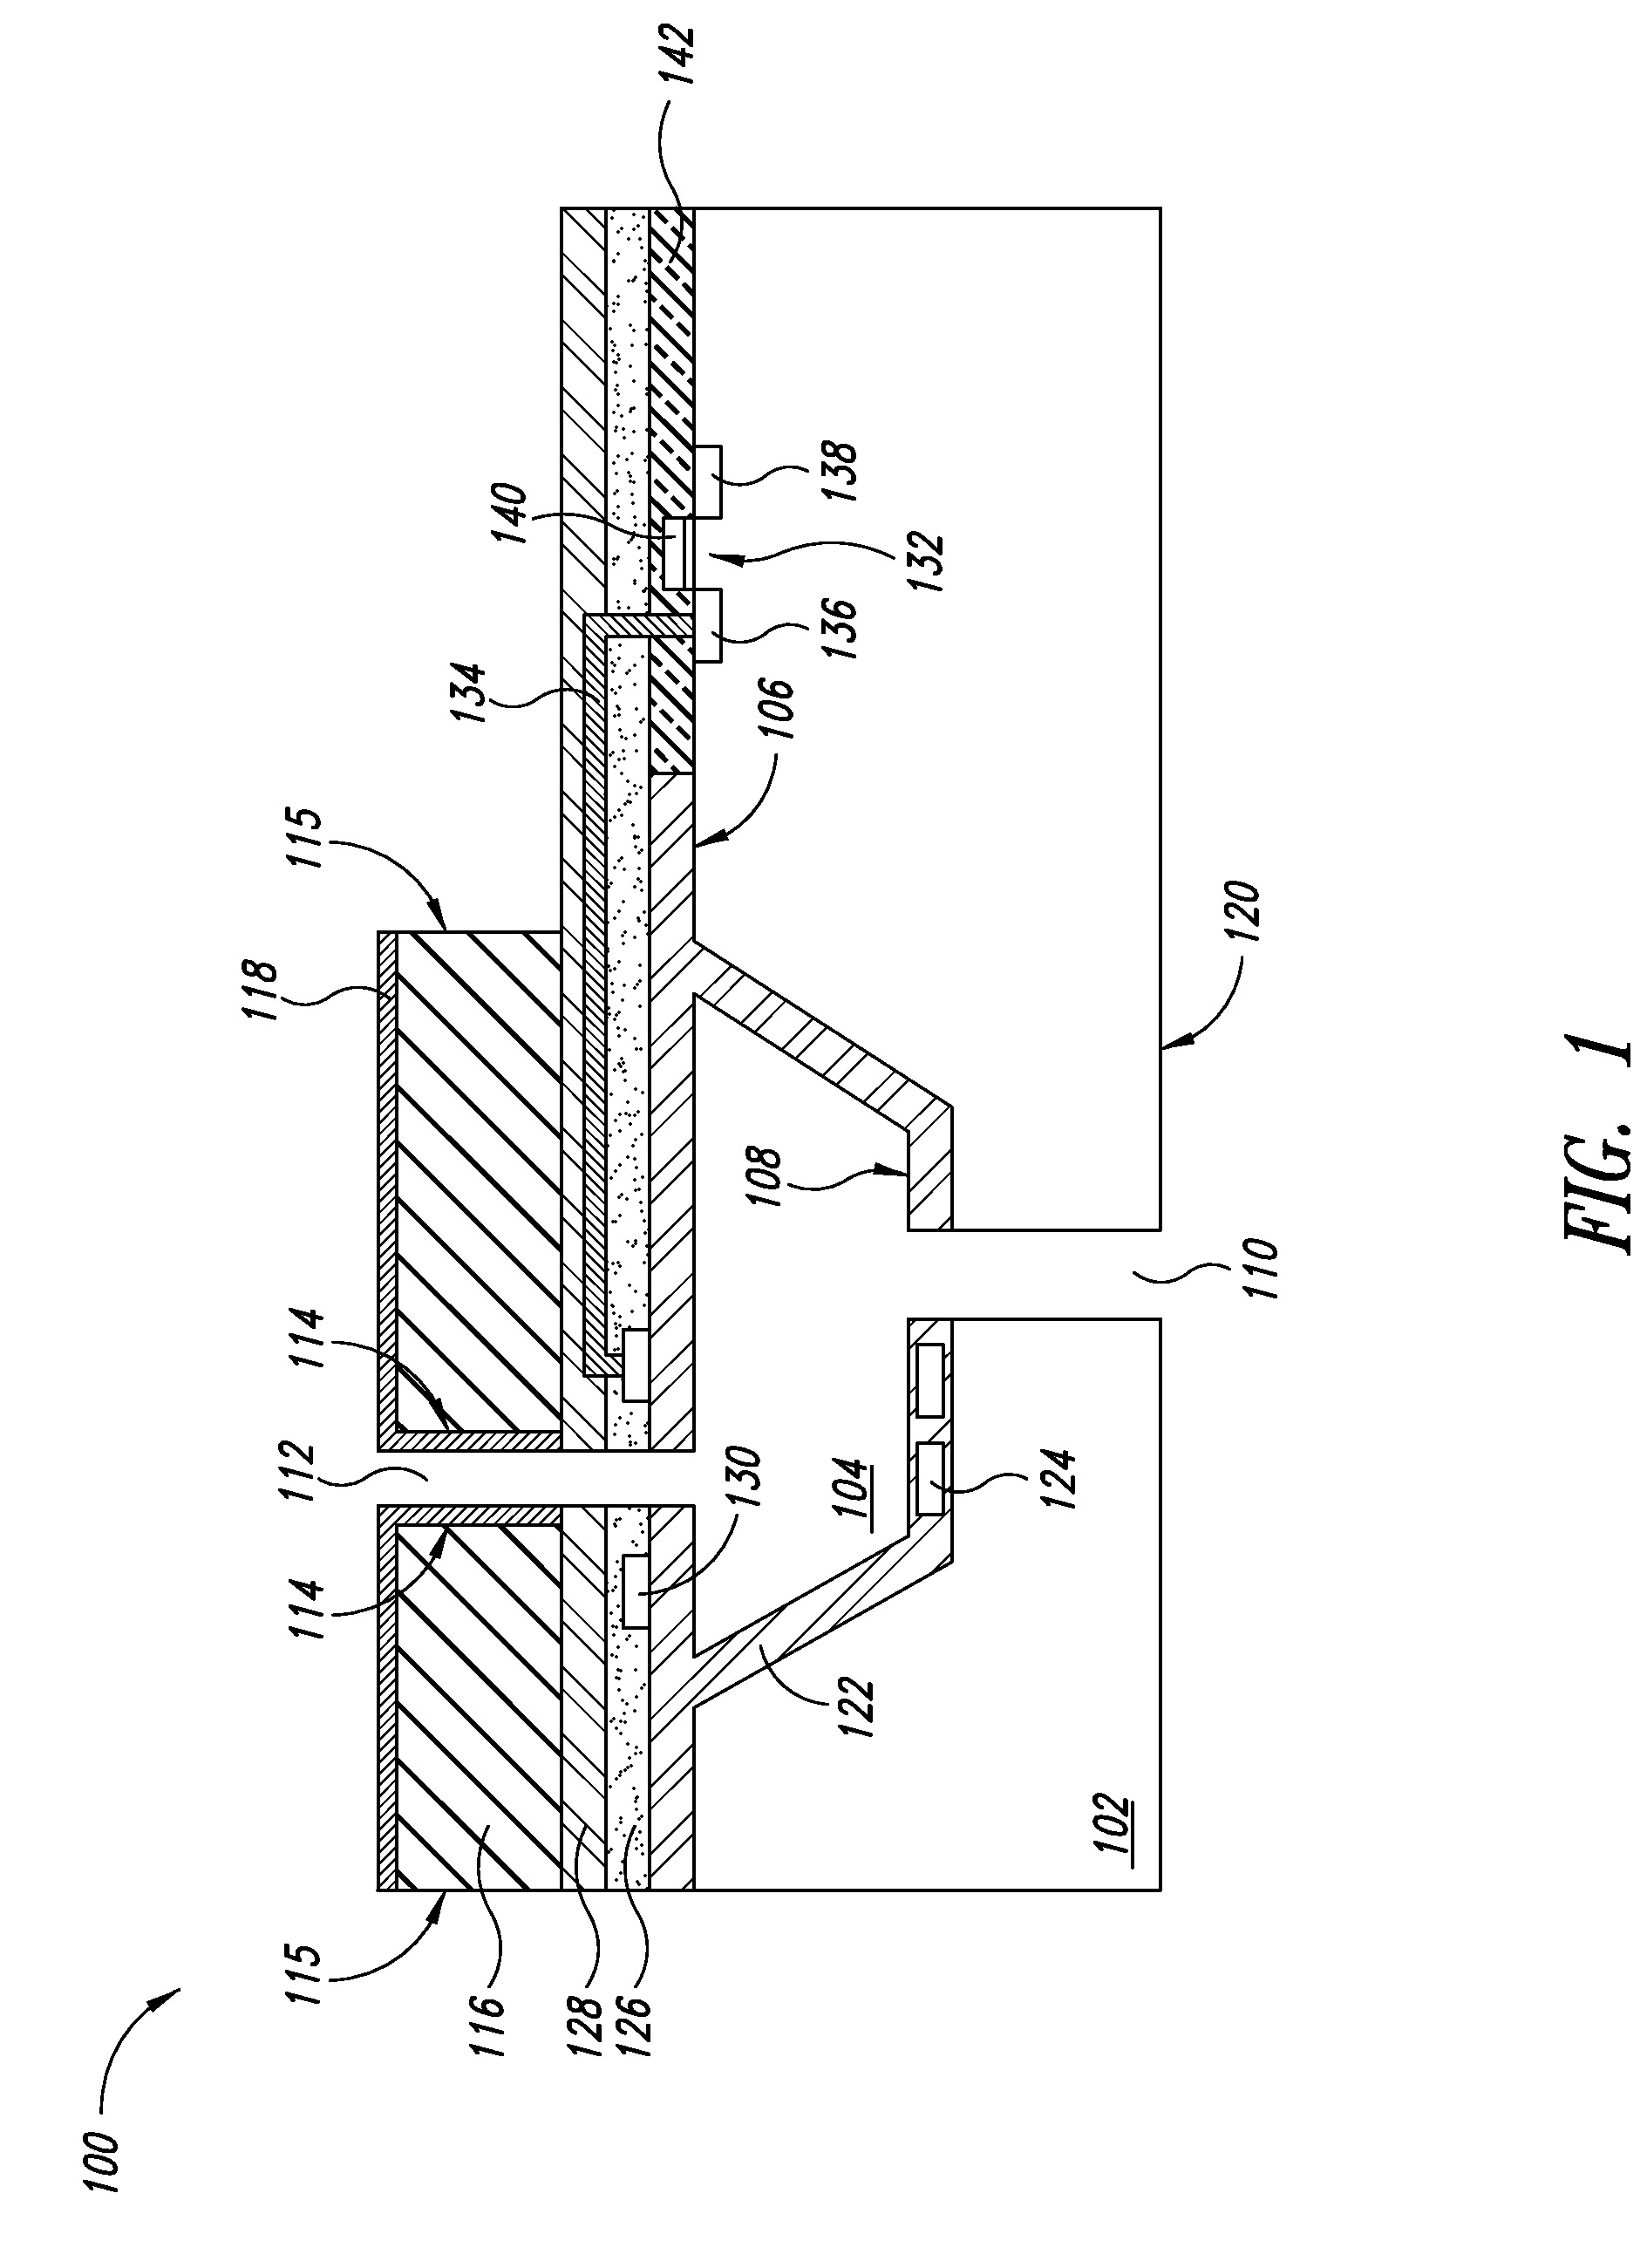 Microfluidic nozzle formation and process flow